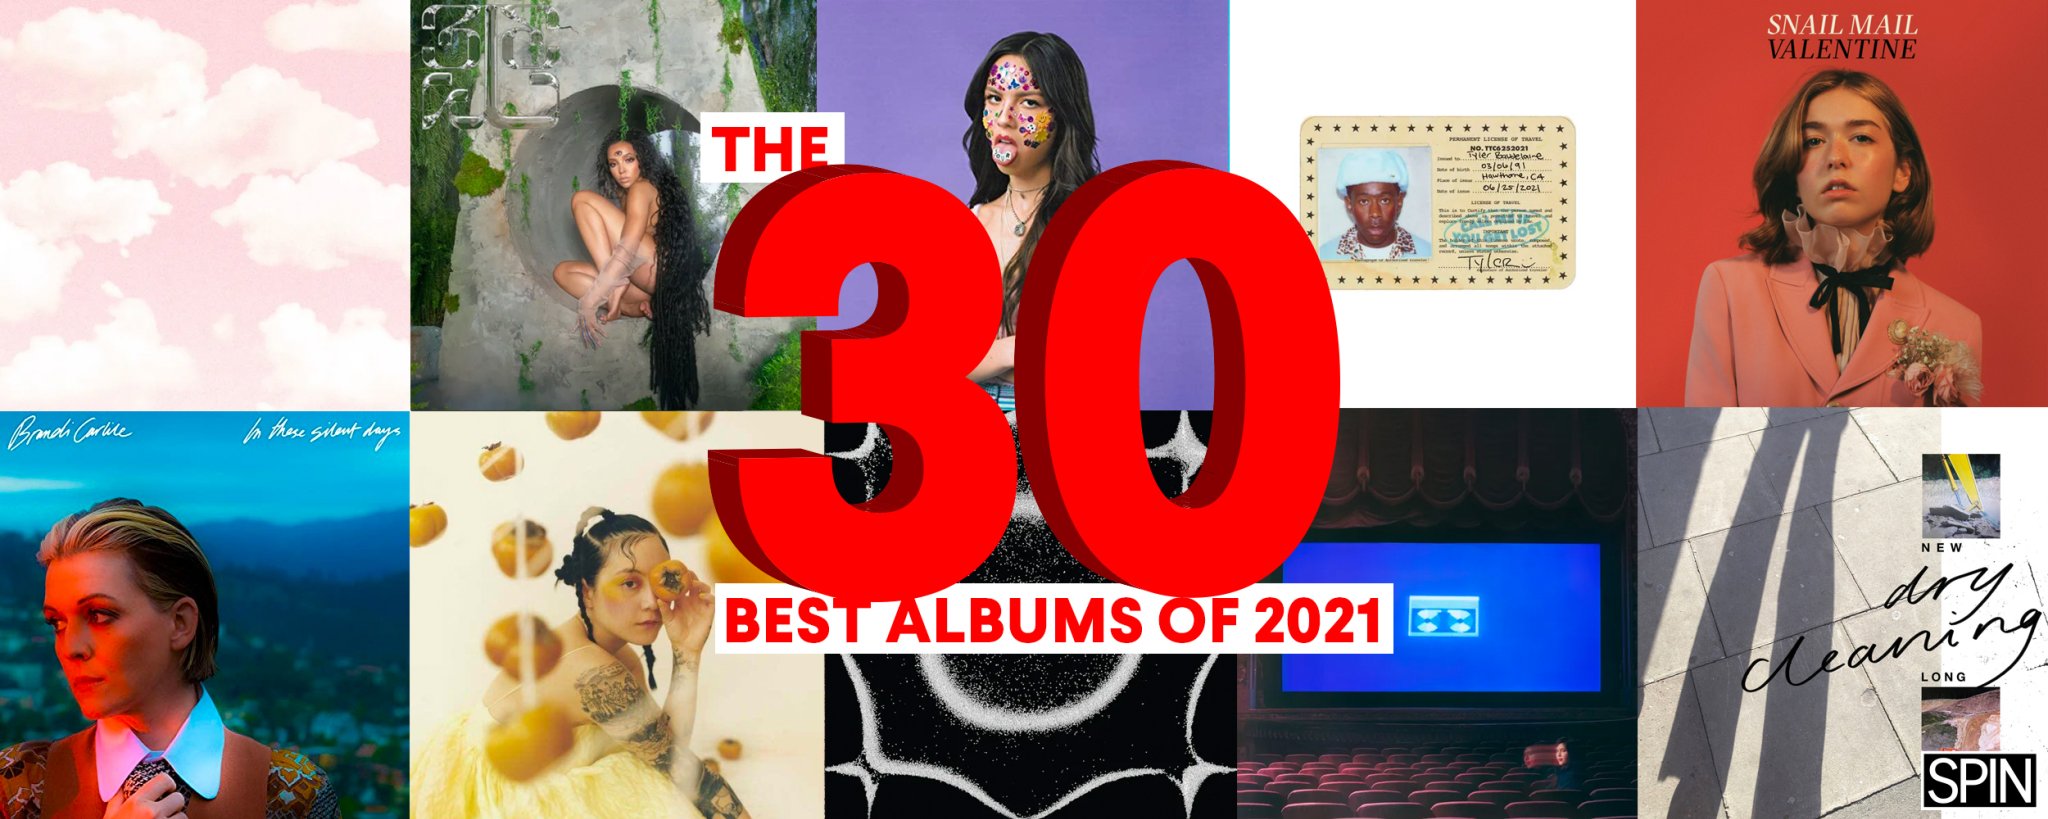 The 30 Best Albums of 2021 - SPIN